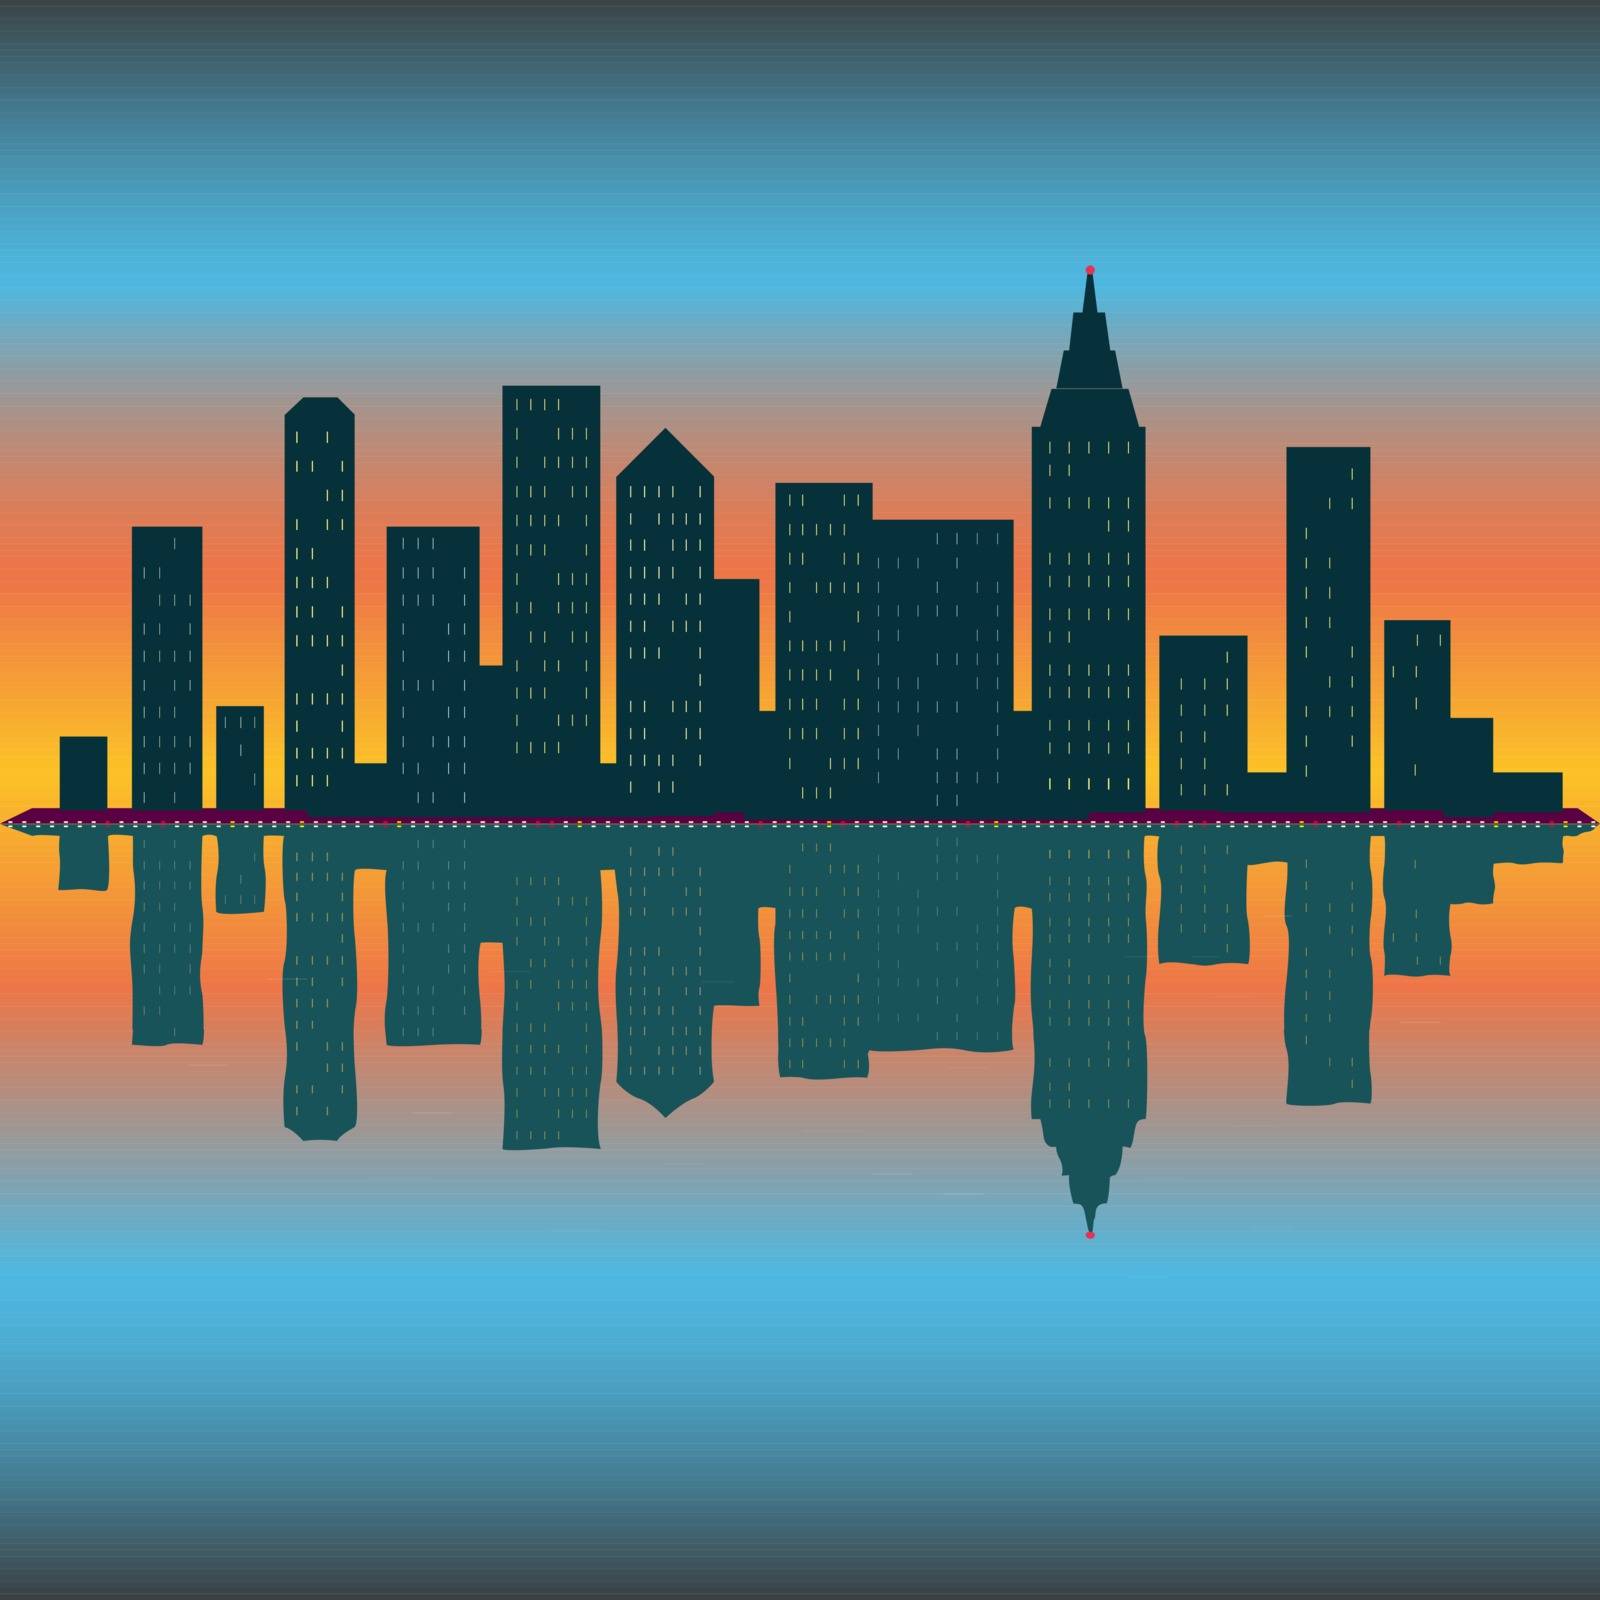 Skyline wallpaper with skyscrapers in sunset or sunrise. Eps10 vector illustration. by Zhukow